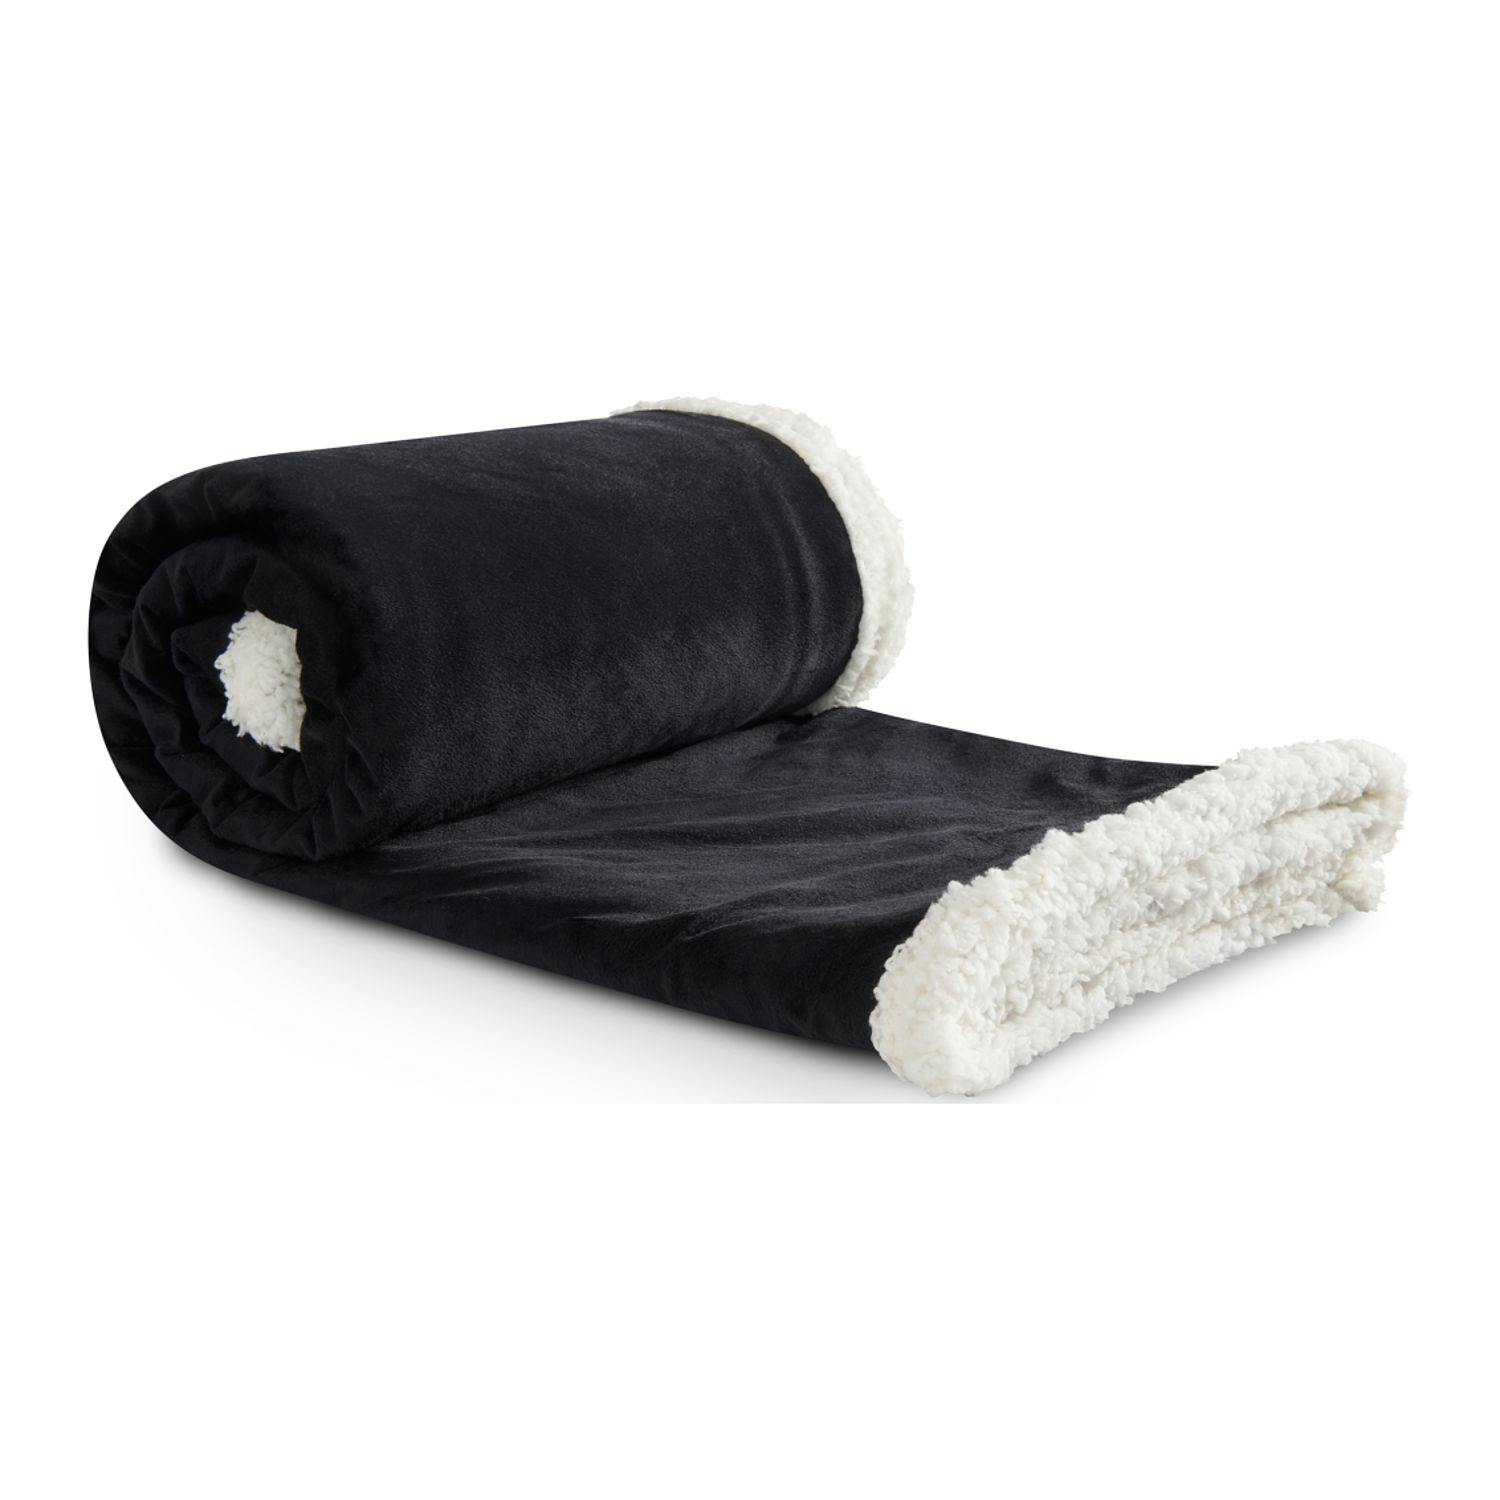 Field & Co. 100% Recycled PET Sherpa Blanket - additional Image 4